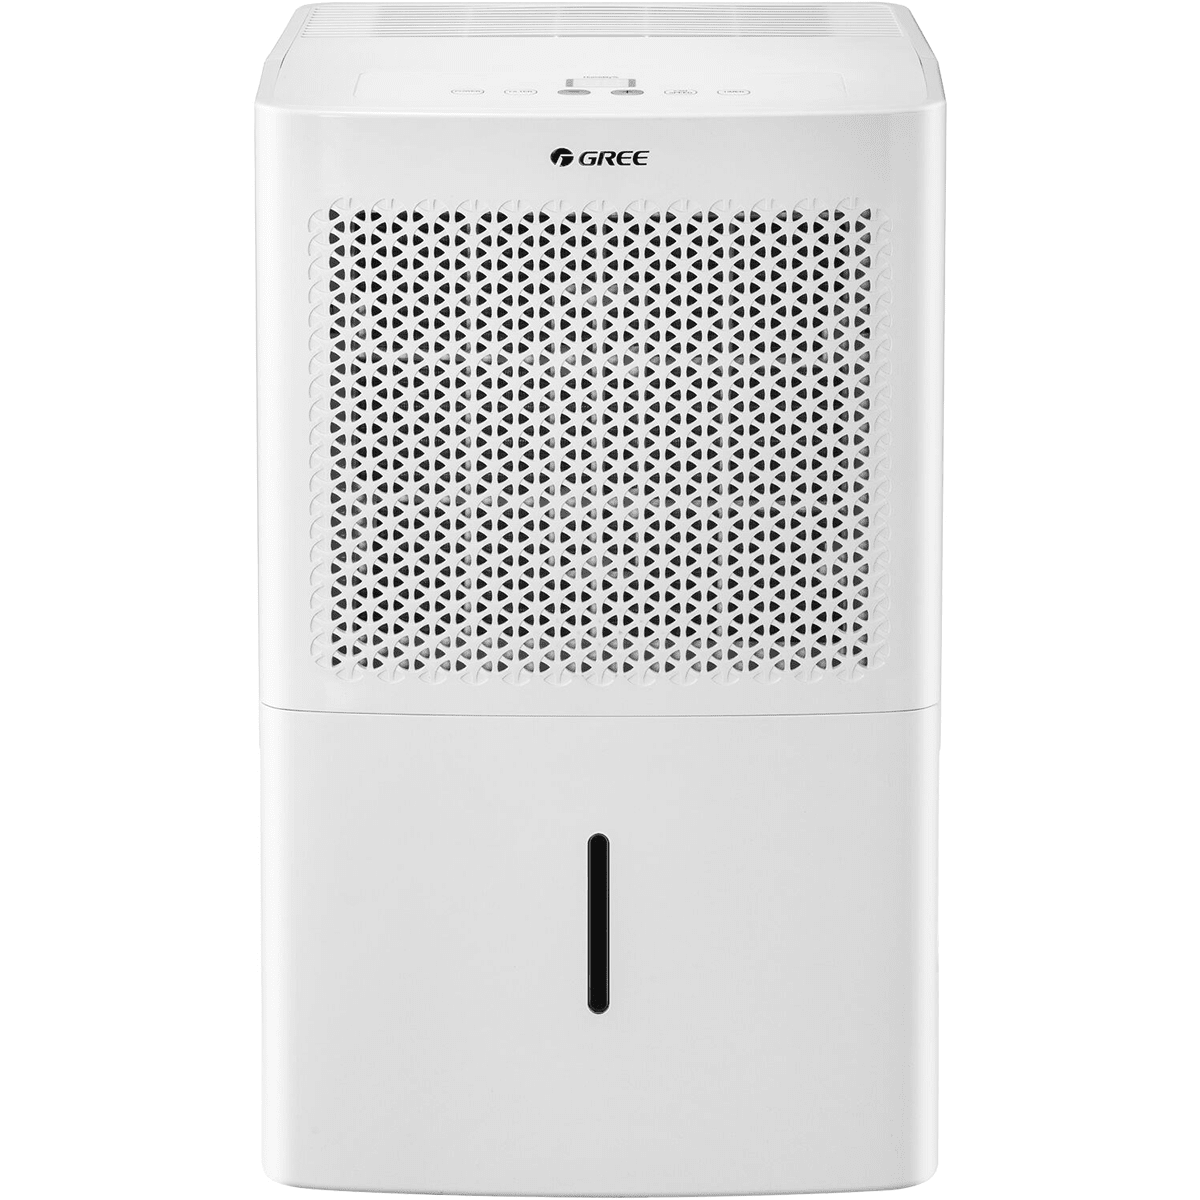 Gree 50 Pint Energy Star Dehumidifier - Without Pump